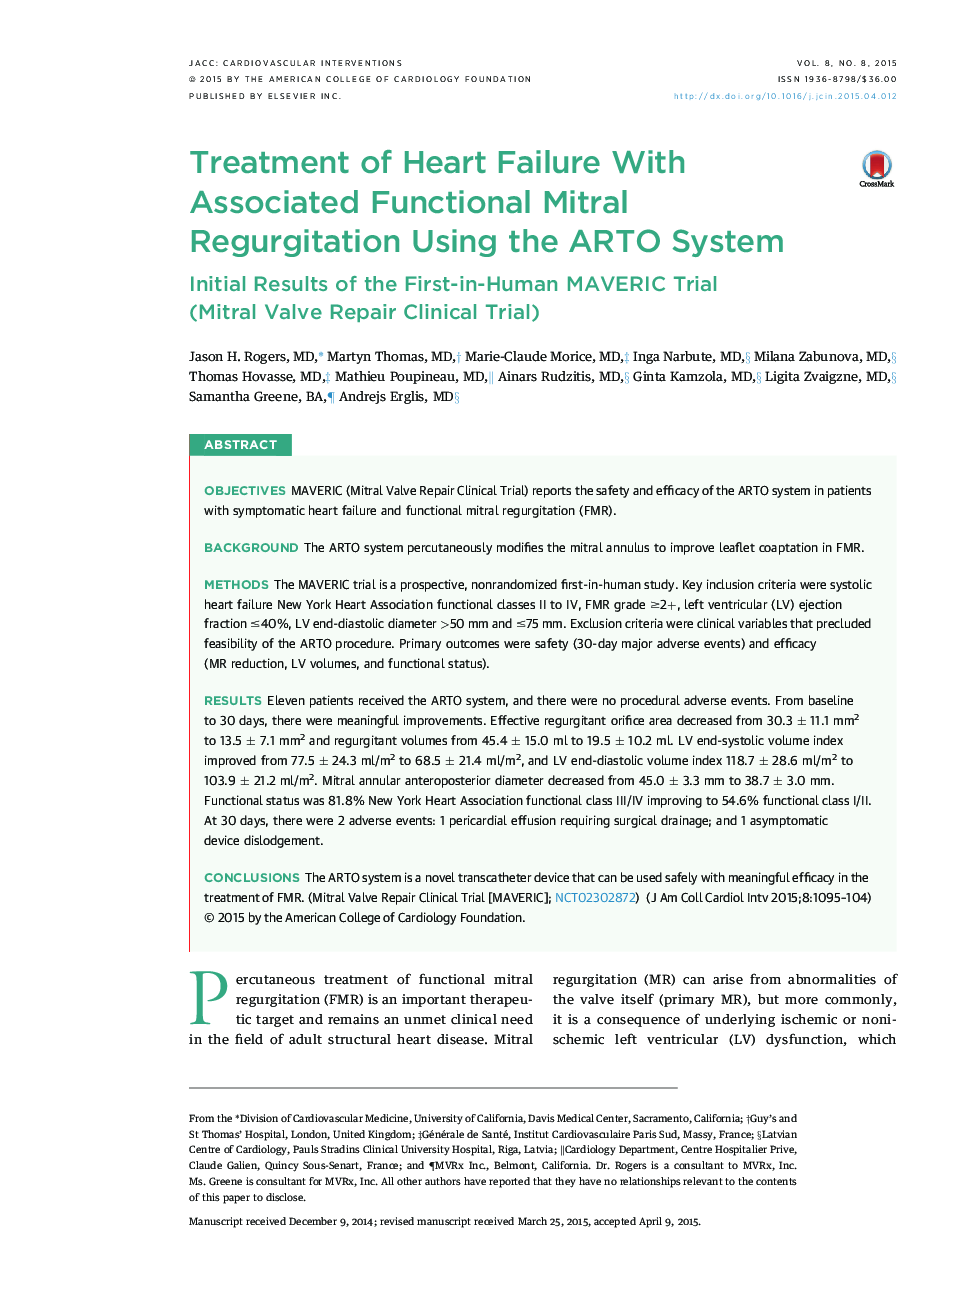 Treatment of Heart Failure With Associated Functional Mitral RegurgitationÂ Using the ARTO System: Initial Results of the First-in-Human MAVERIC Trial (Mitral Valve Repair Clinical Trial)